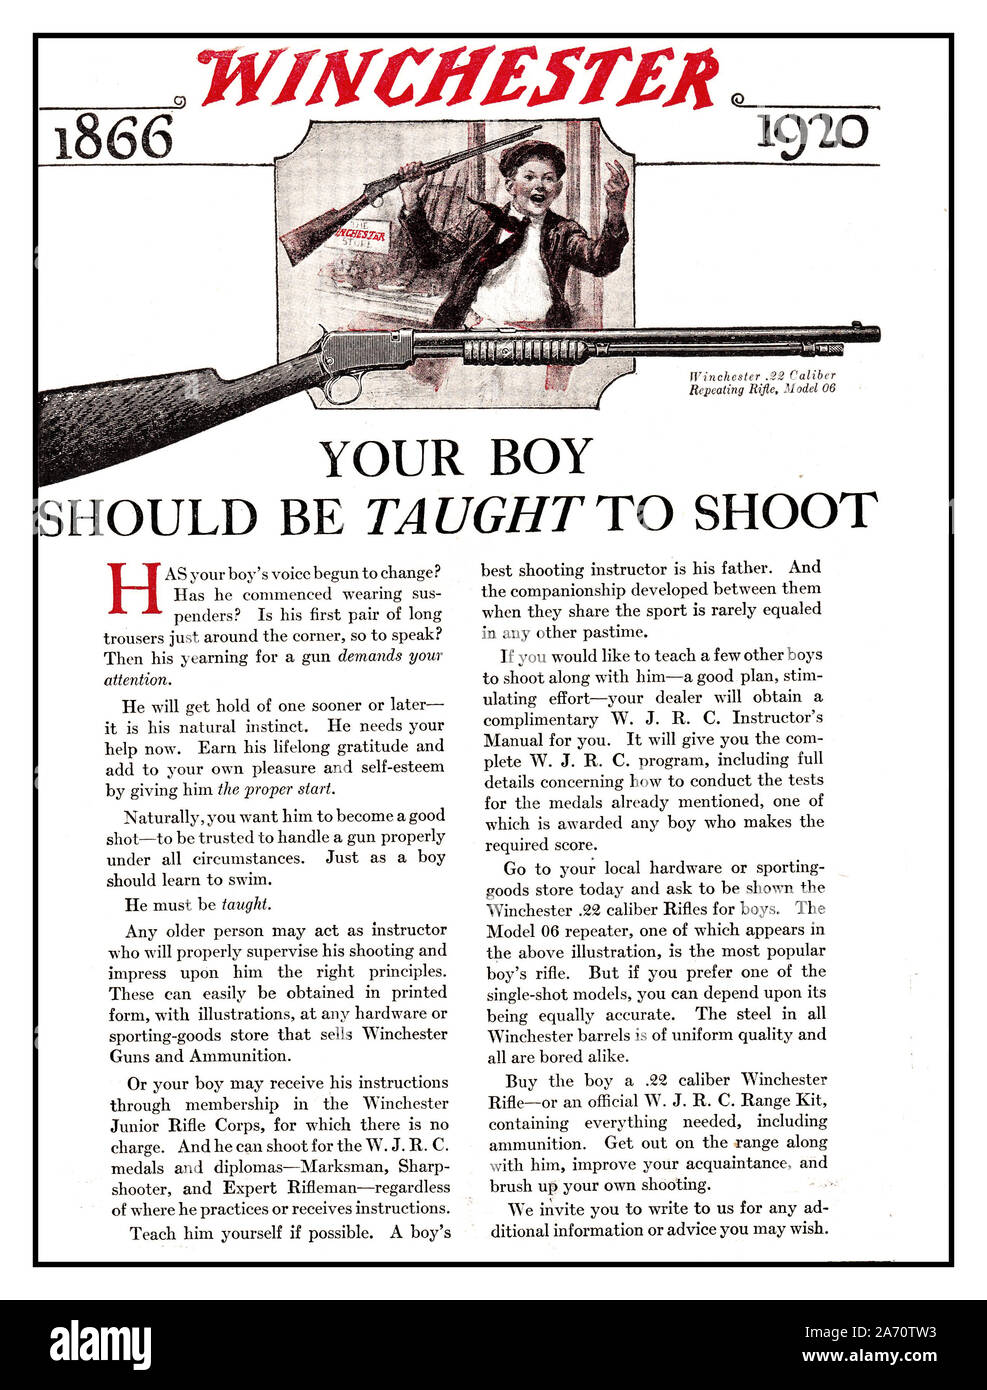 Vintage American 1920's 'WINCHESTER RIFLE' magazine advertisement promoting training a son to learn to shoot. ' Your Boy Should Be Taught To Shoot'  Winchester 1866-1920 USA  Gun culture heritage in America Stock Photo